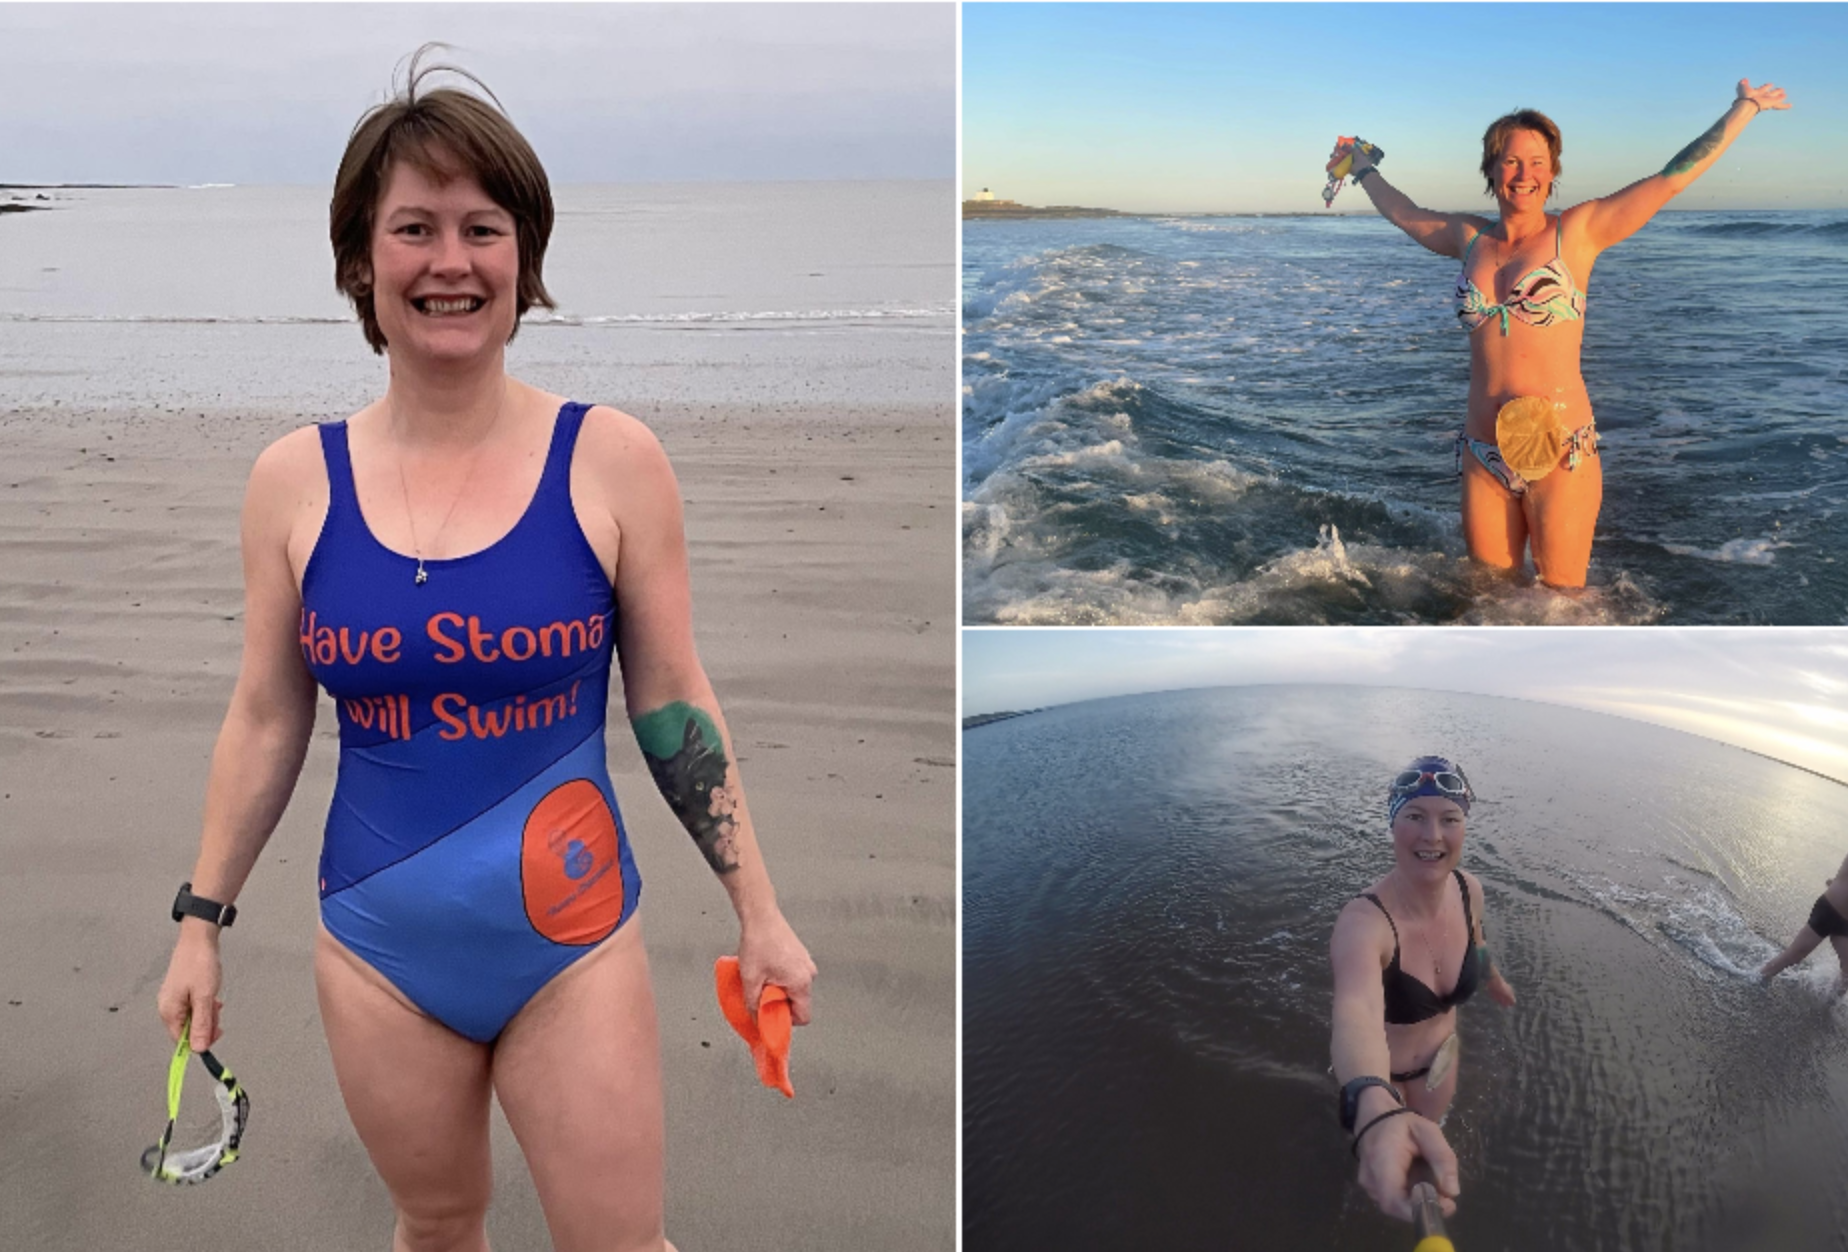 Swimming with my stoma bag - BBC News